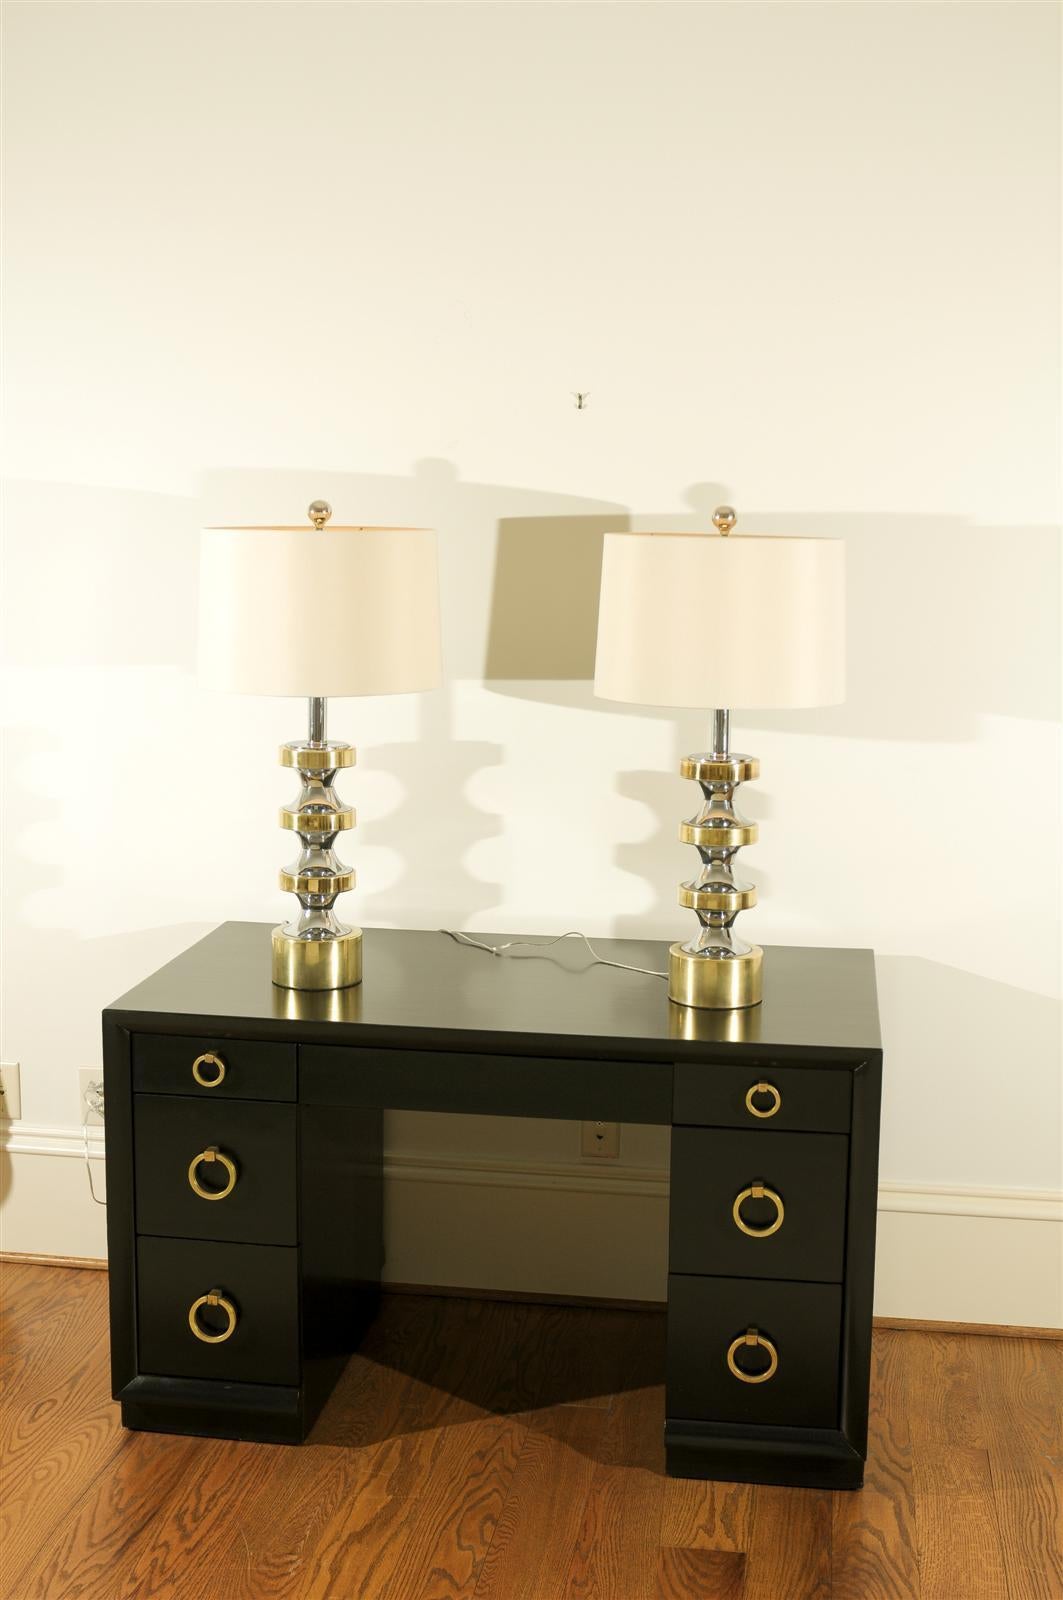 A superb pair of vintage stacked disk lamps in chrome and brass, circa 1970.  The components of these stylish pieces have aged to absolute perfection and display fabulous patina.  Dramatic Jewelry !  Excellent Restored Condition.  The lamps have